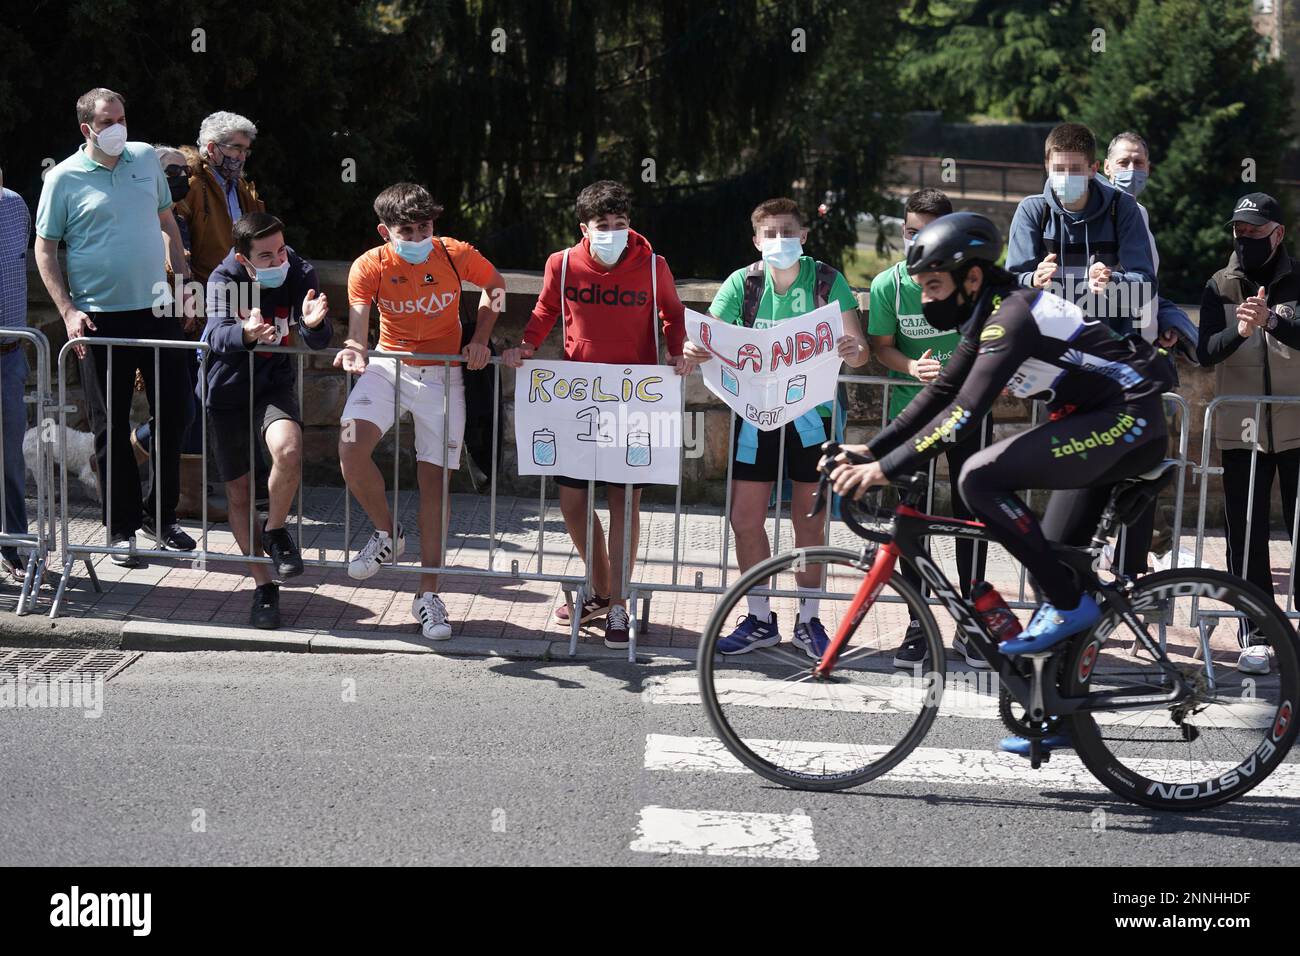 https://c8.alamy.com/comp/2NNHHDF/young-people-cheer-on-a-cyclist-during-the-first-stage-of-the-itzulia-2021-on-april-5-2021-in-bilbao-euskadi-spain-bilbao-hosts-this-monday-the-start-of-the-60th-edition-of-the-itzulia-the-tour-of-the-basque-country-the-1st-stage-consists-of-a-time-trial-of-14-kilometers-starting-in-the-parking-area-of-the-basilica-of-begoa-approximately-between-1230-and-1600-hours-and-finishing-in-the-etxebarria-park-with-a-route-through-the-capital-of-bizkaia-05-april-2021itzulia-2021basque-countryvuelta-ciclistasport-hbilbao-europa-press-04052021-europa-press-via-ap-2NNHHDF.jpg